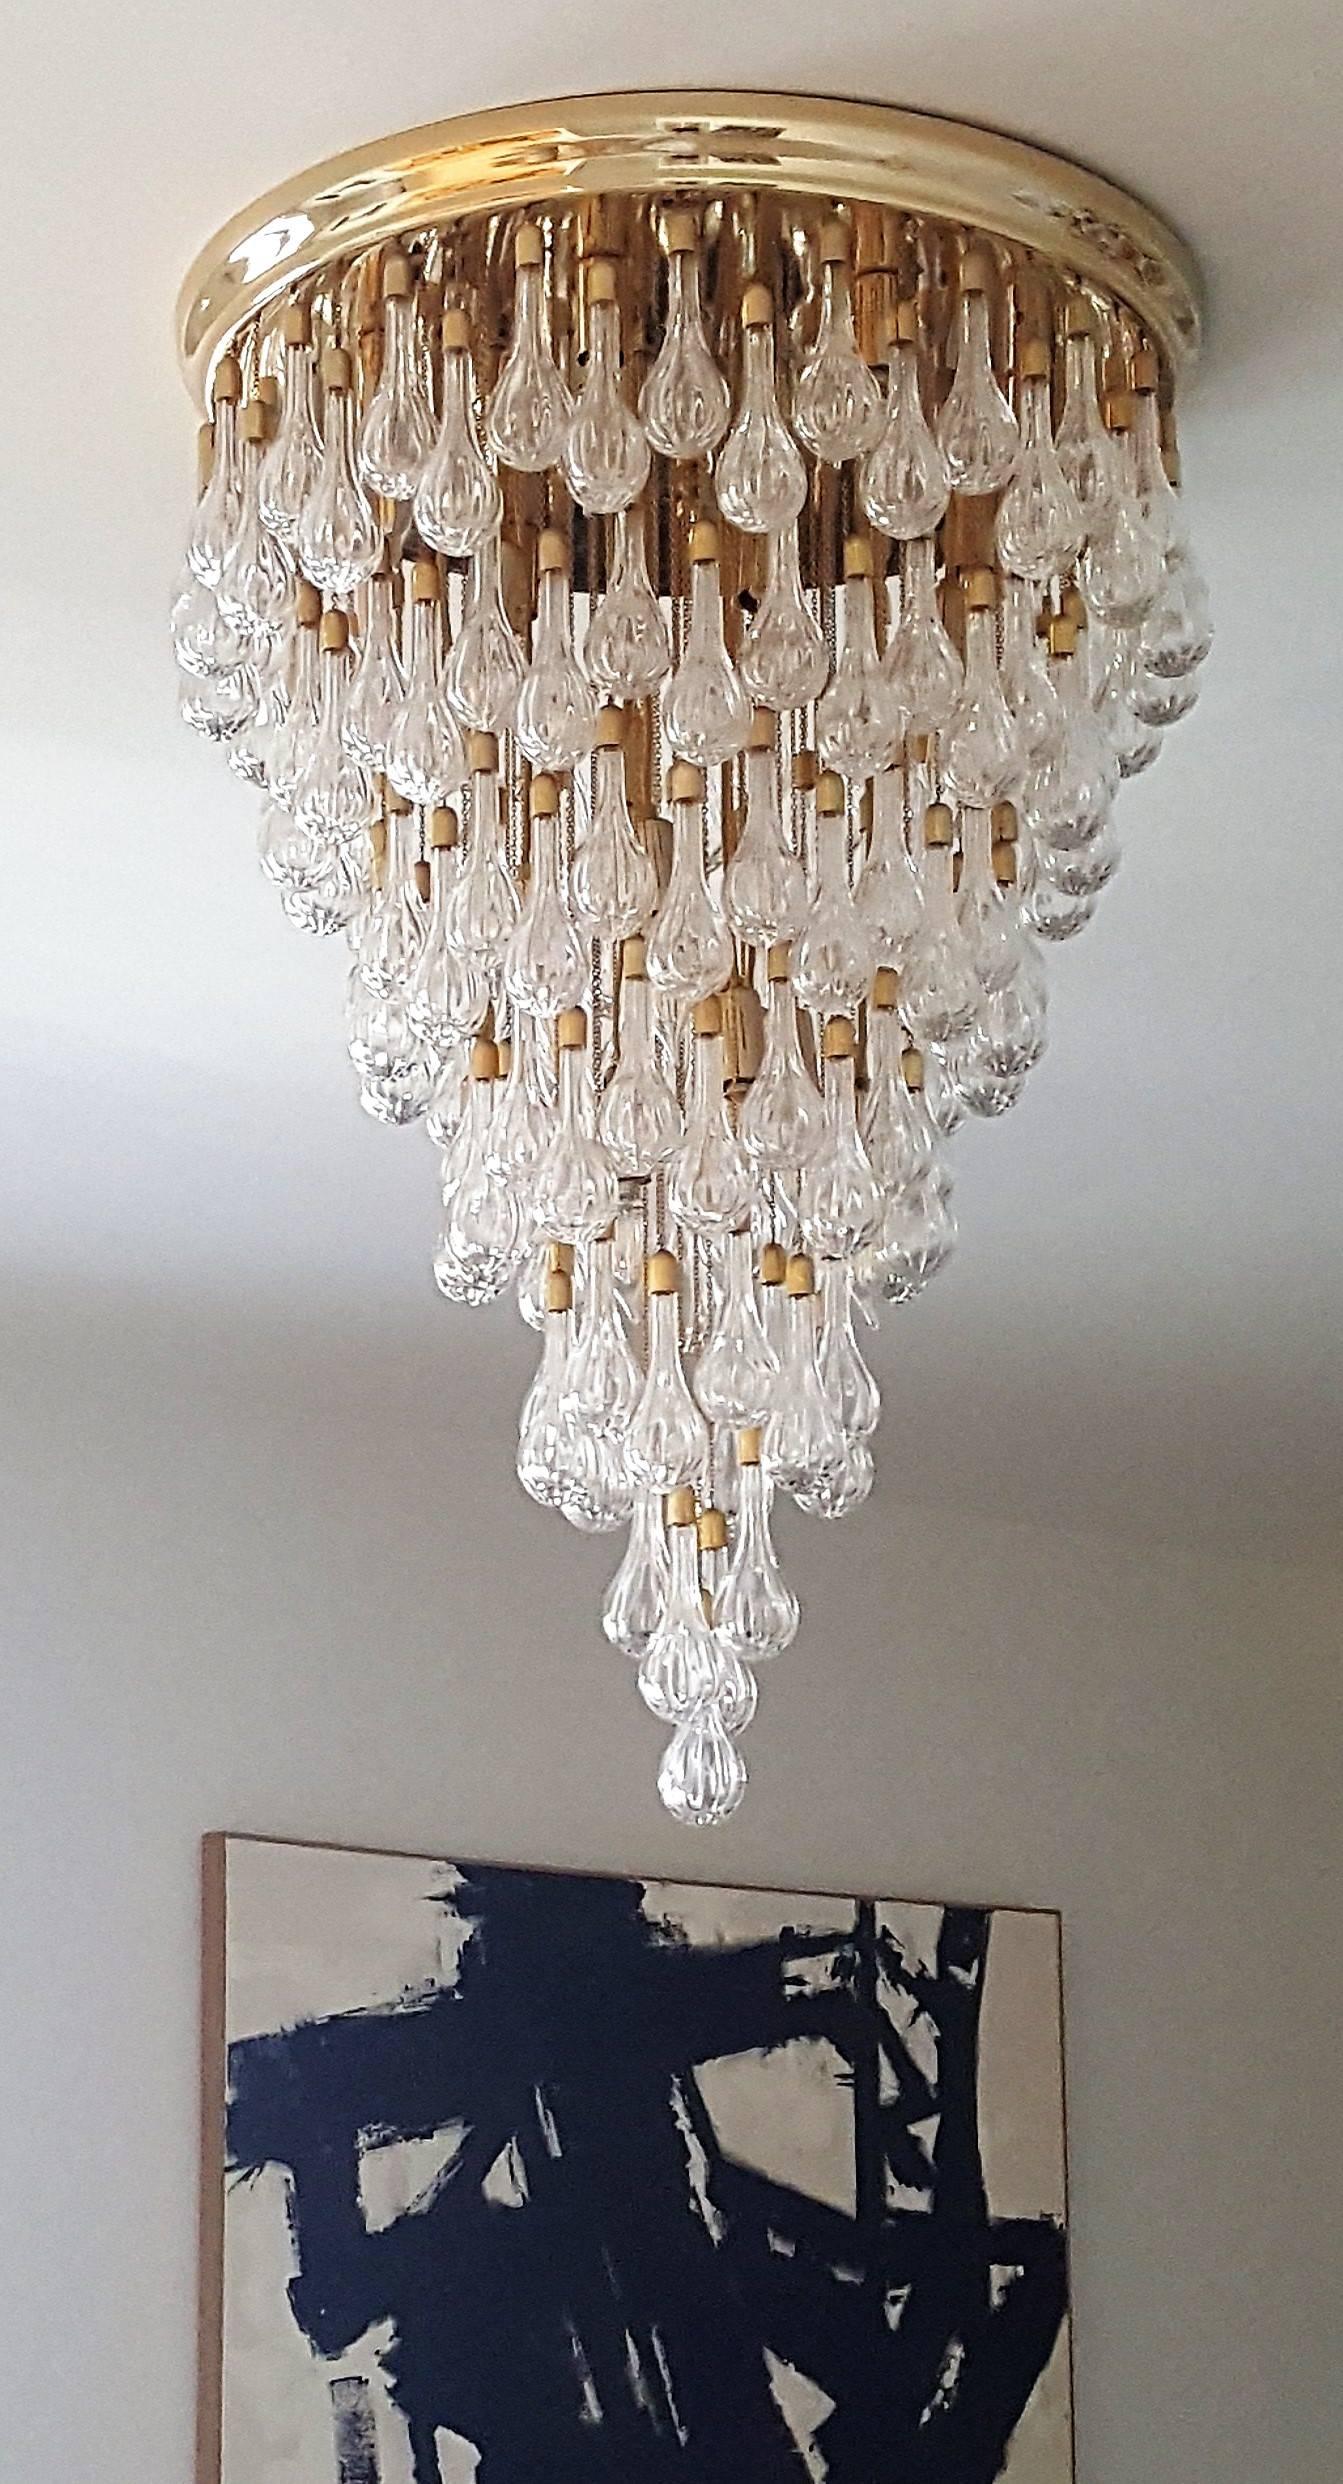 A Midcentury Italian chandelier 36 in in the style of Cenedese comprised of handblown Murano ridged teardrop or 